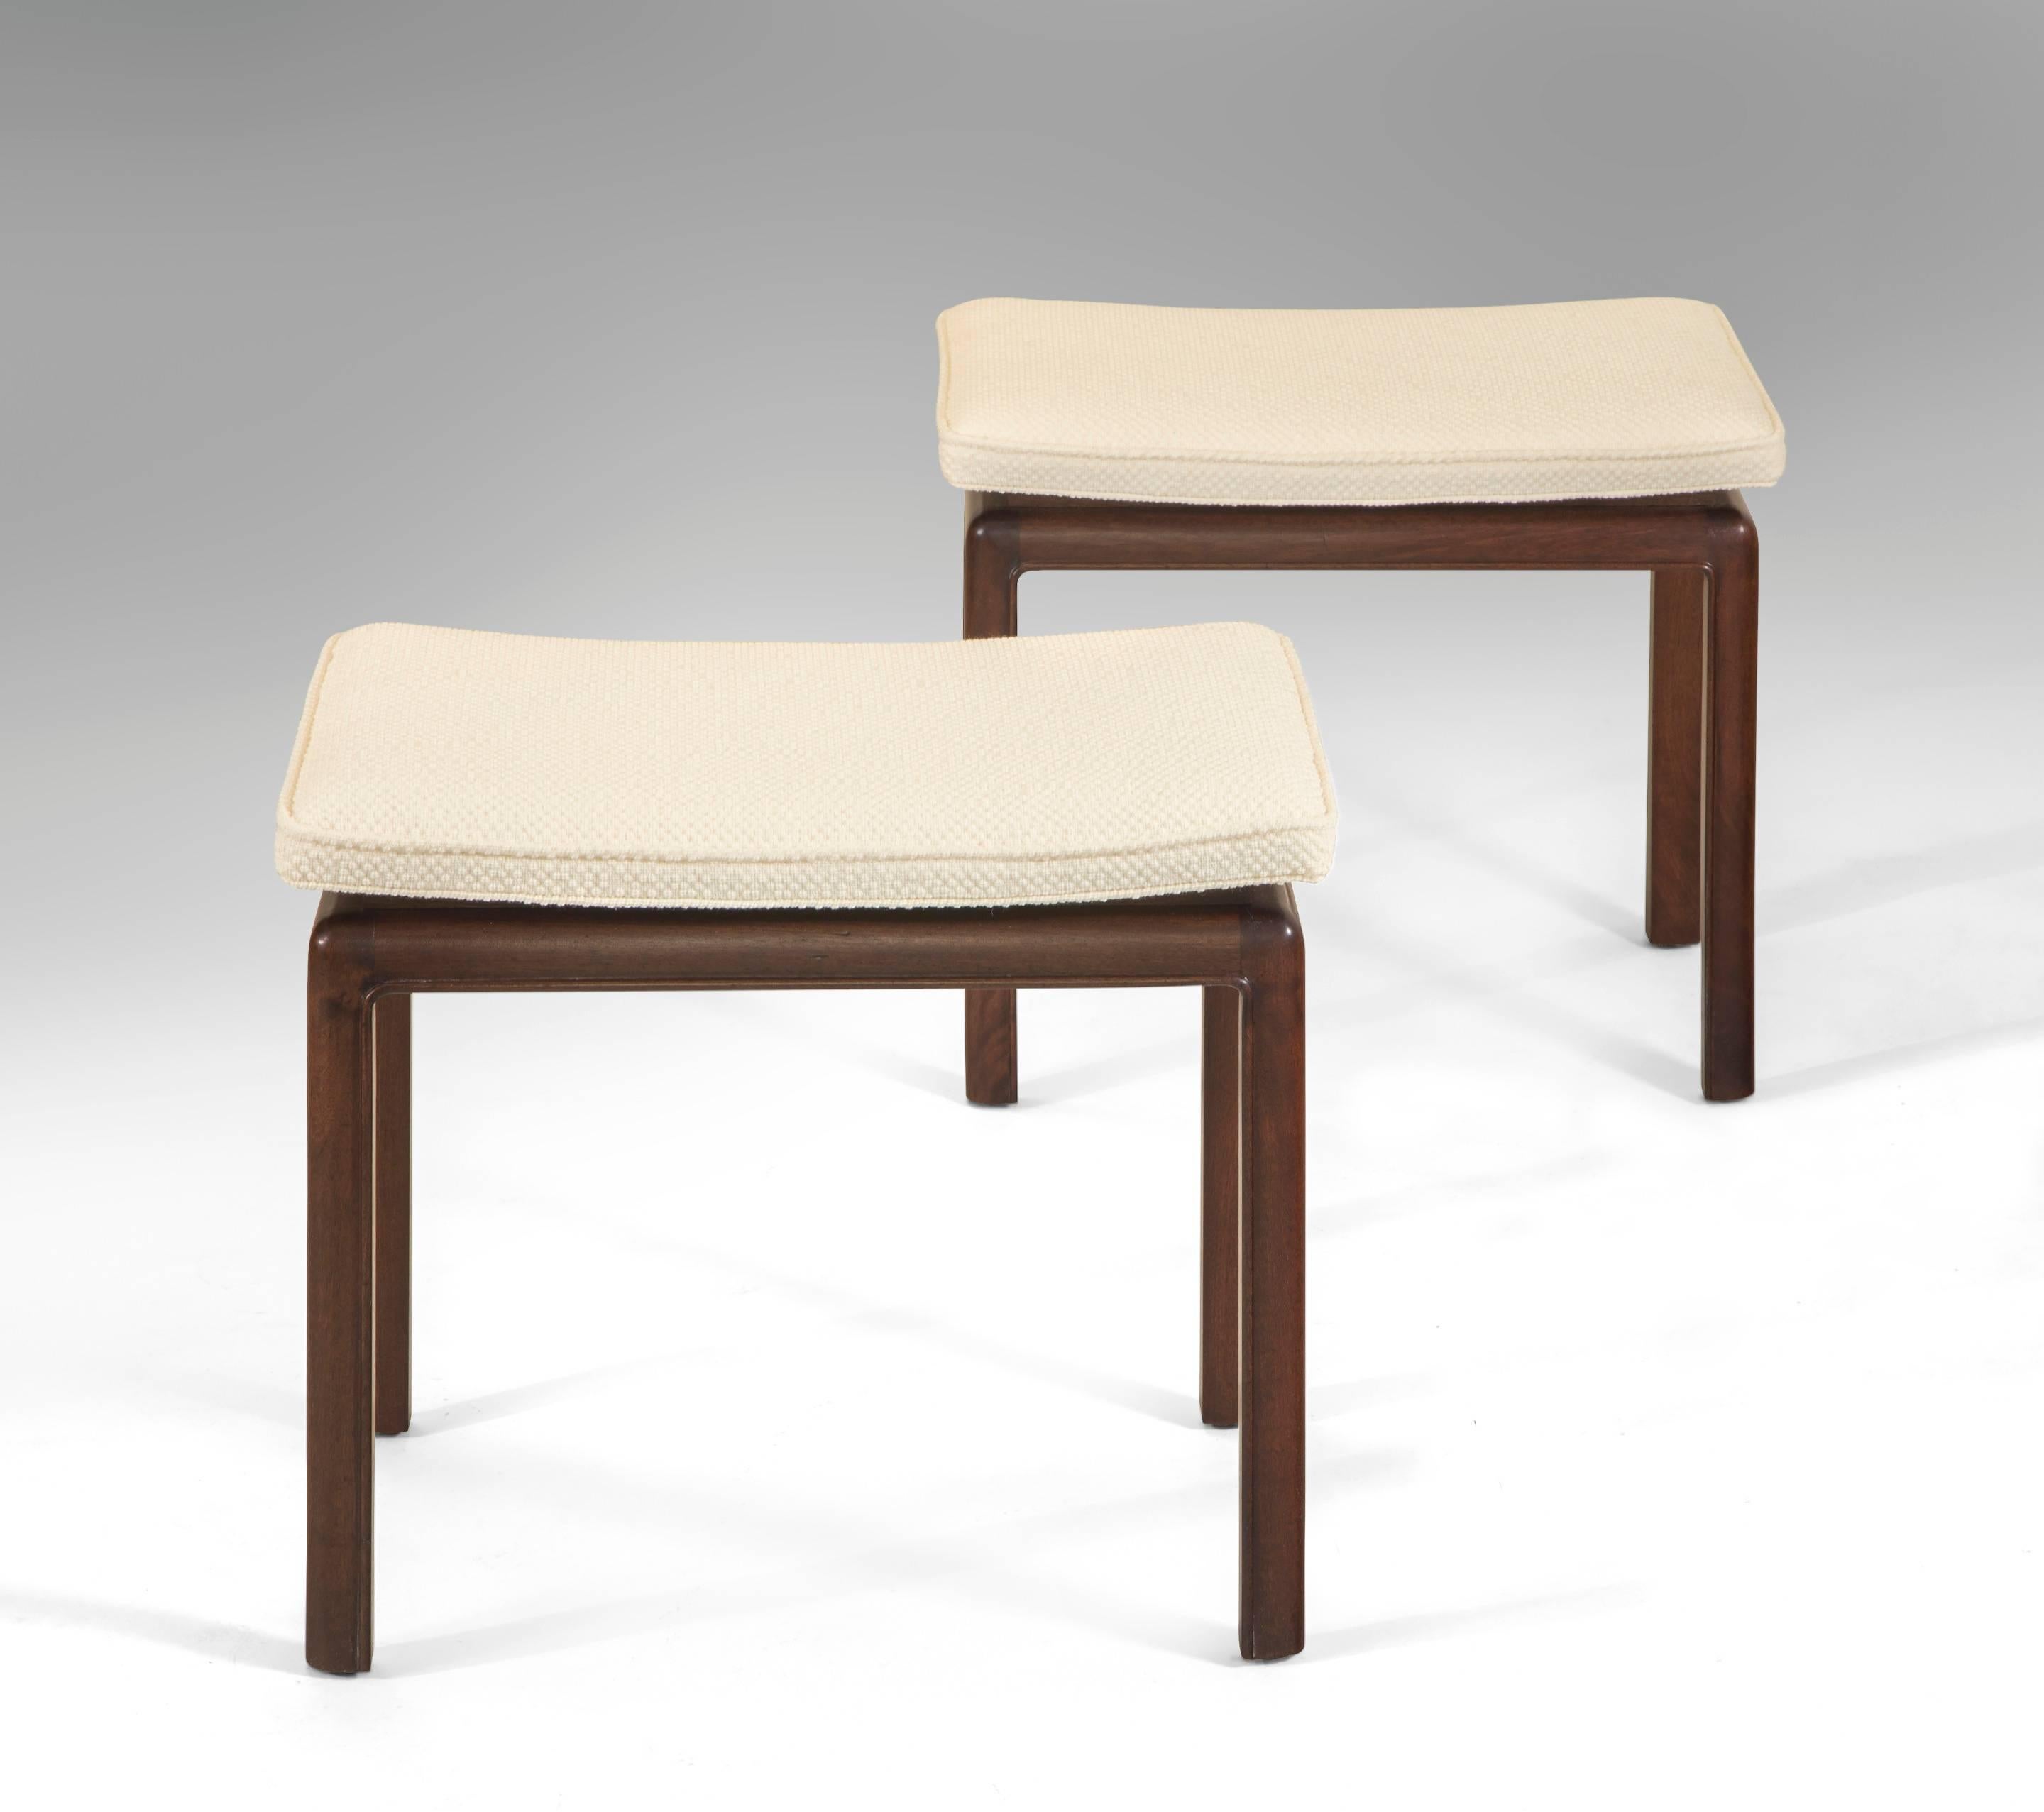 A handsome pair of elegant stools finely made. The rectangular concave upholstered seat floating above the recessed mahogany base with rounded corners and a sophisticated molded edge.